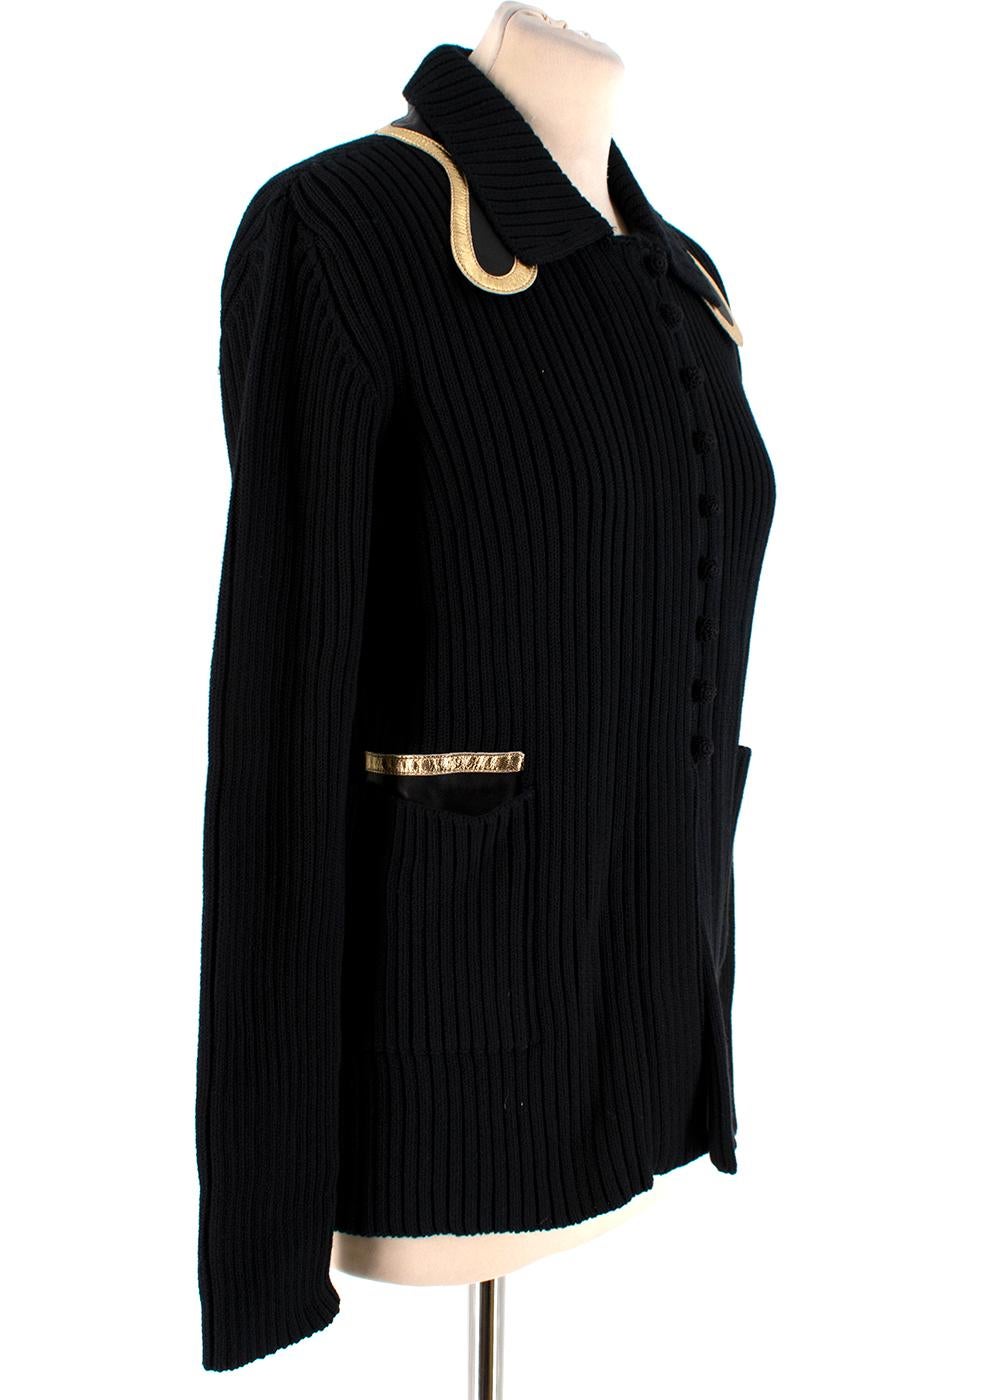 Prada Black Ribbed Knitted Cardigan with Gold Trim

- Button down front closure 
- ribbed knit 
- Leather and Gold trim to layered collar 
- Front Slip pockets 
- straight hemline

Materials 
100% Cotton 
Measurements are taken laying flat, seam to